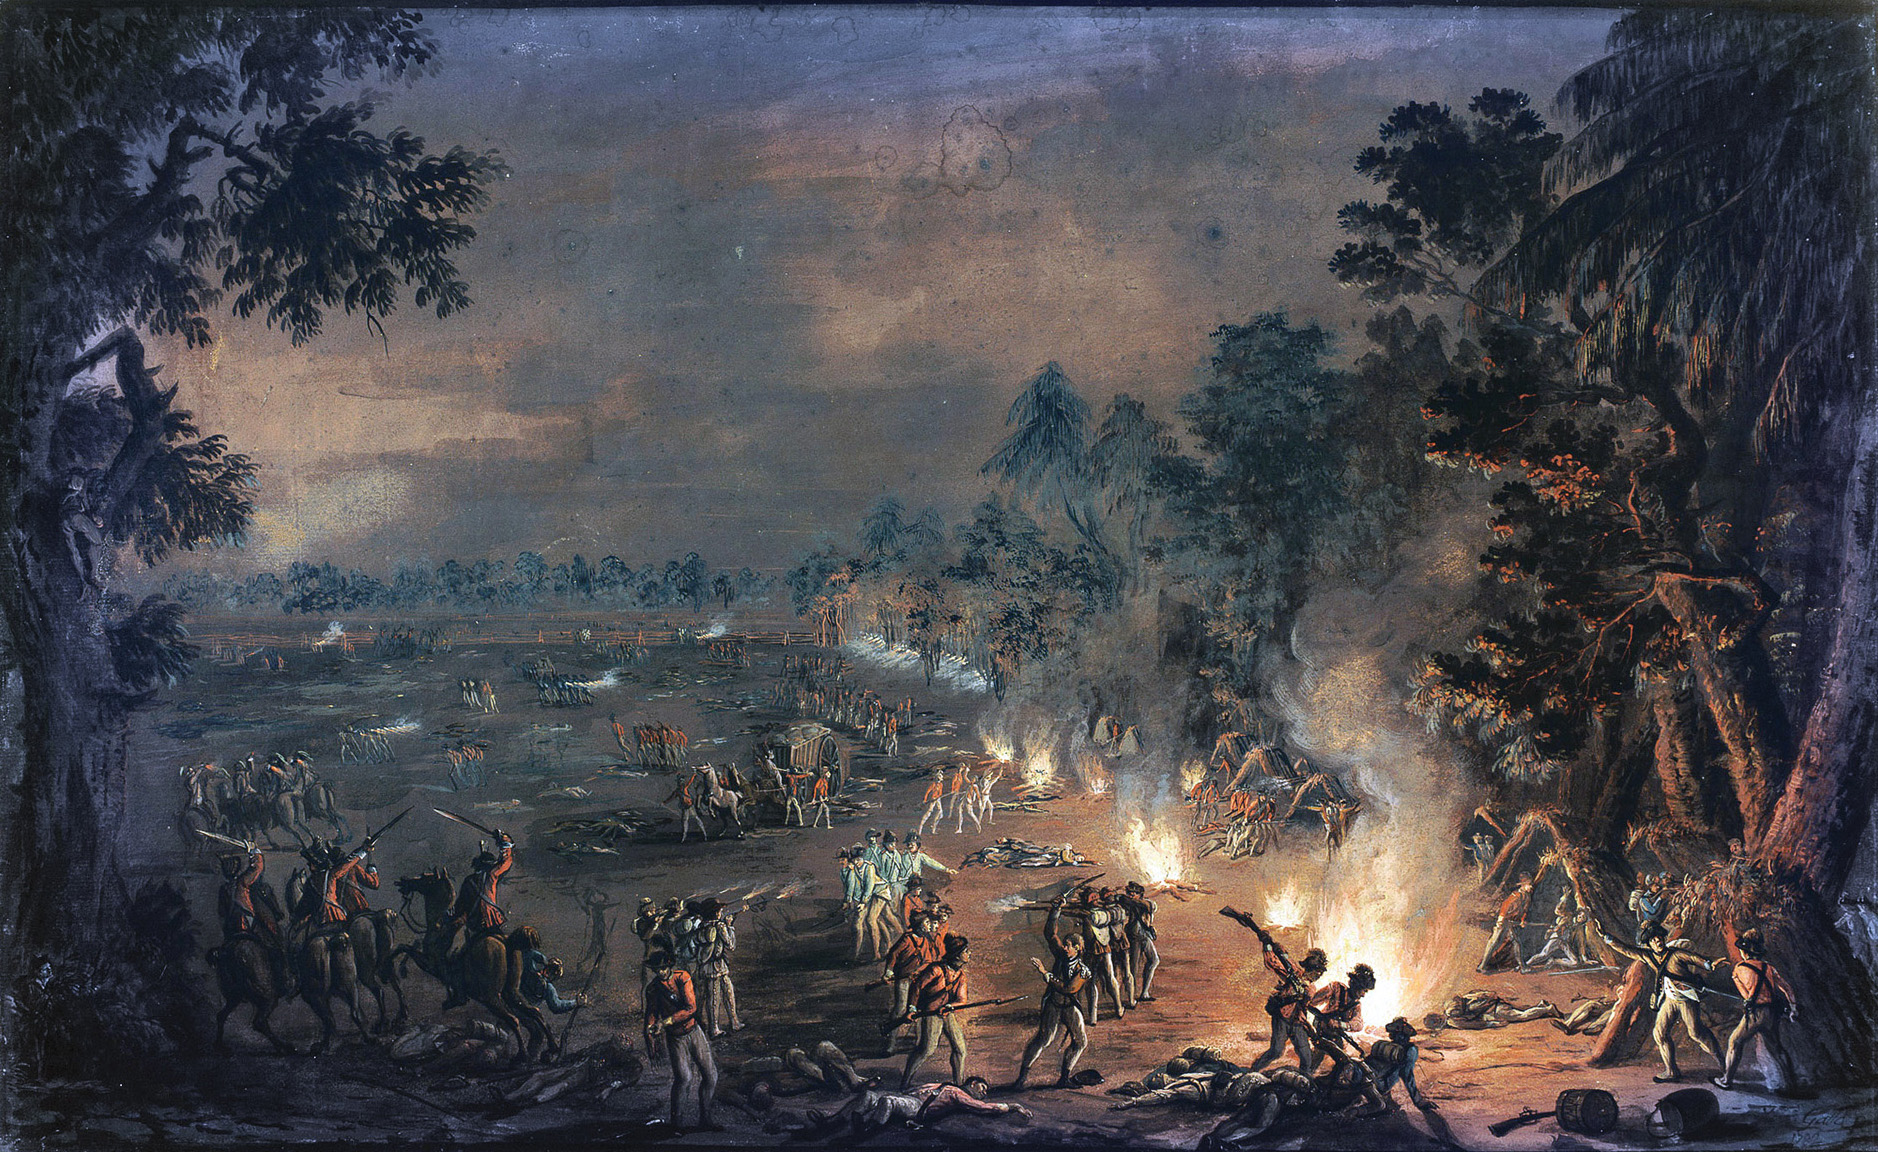 The savage night attack by British light infantry on an American camp at Paoli, Pennsylvania, is depicted in a period painting by Xavier Della Gatto. To ensure the element of surprise, British Maj. Gen. Sir Charles Grey instructed his men not to fire their weapons but instead to rely on their bayonets.